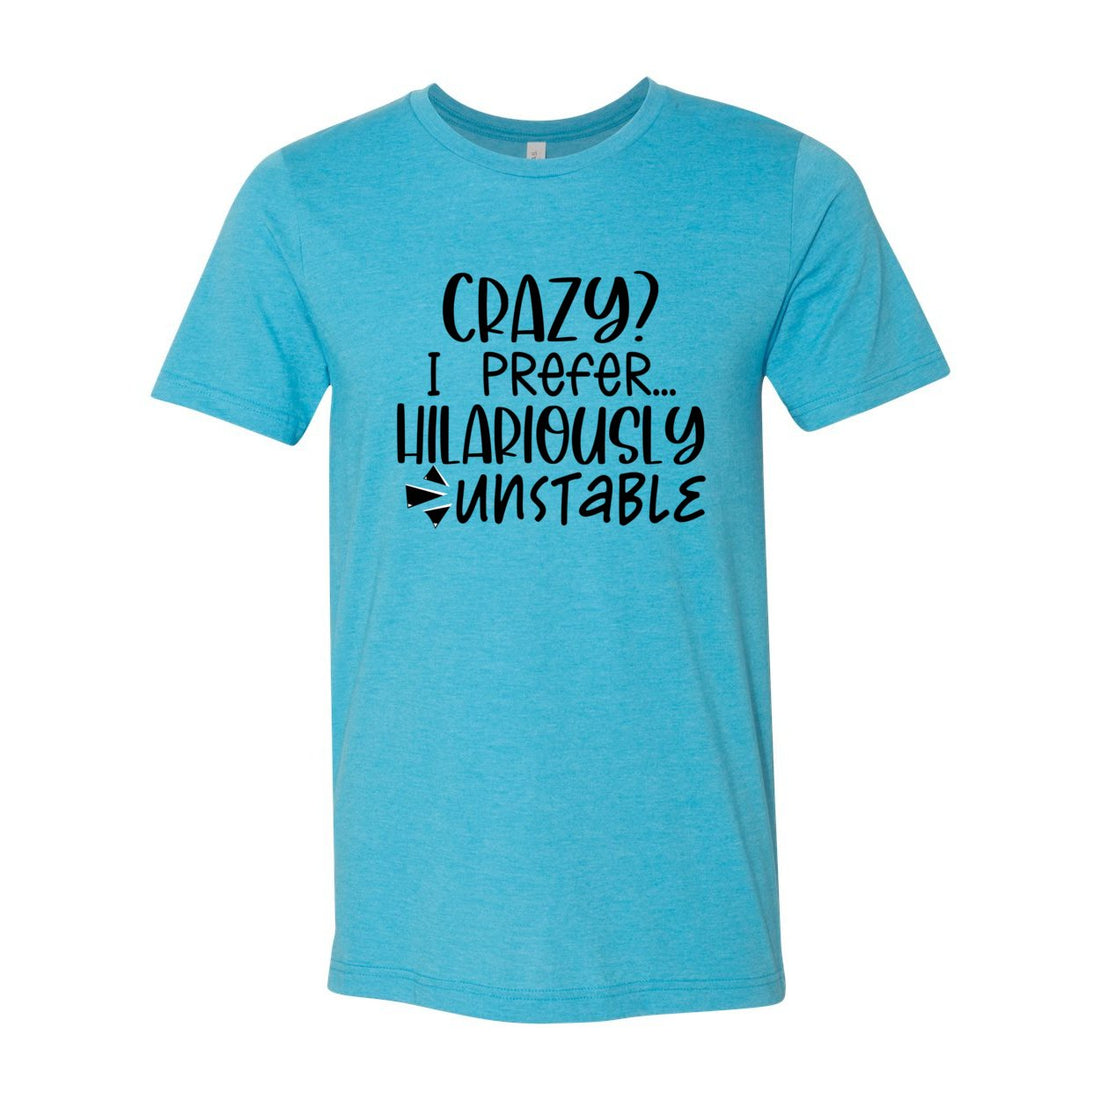 Crazy Jersey Tee - T-Shirts - Positively Sassy - Crazy Jersey Tee